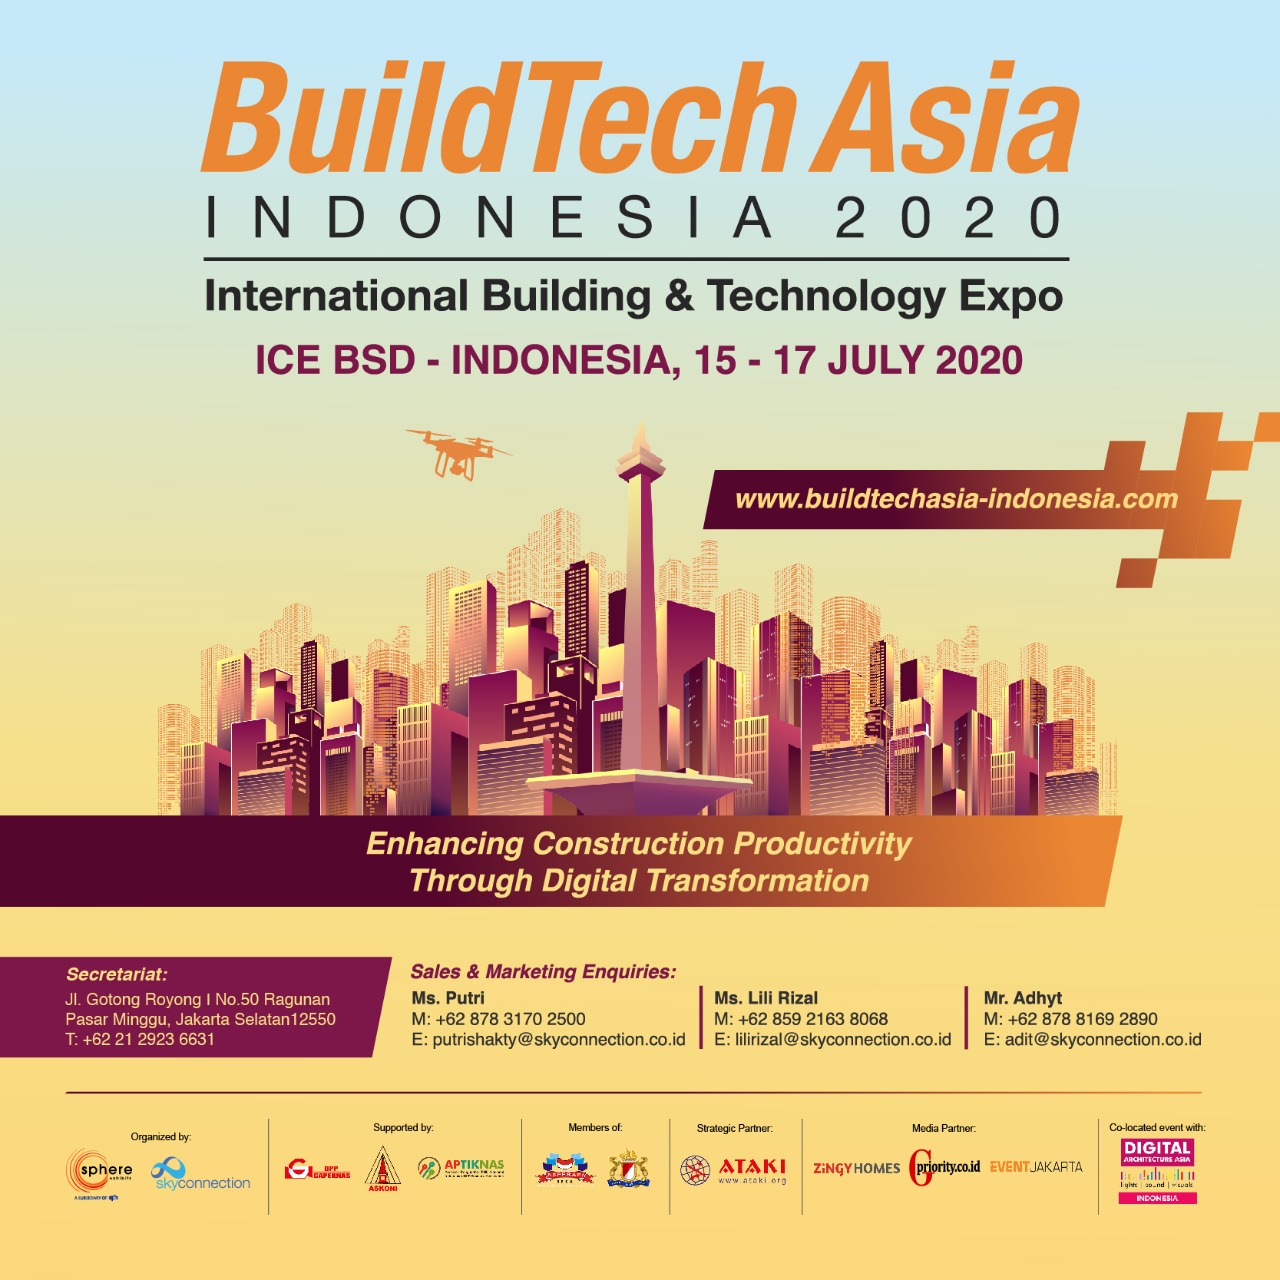 BuildTech Asia-Indonesia 2020 co-located with Digital Architecture Asia